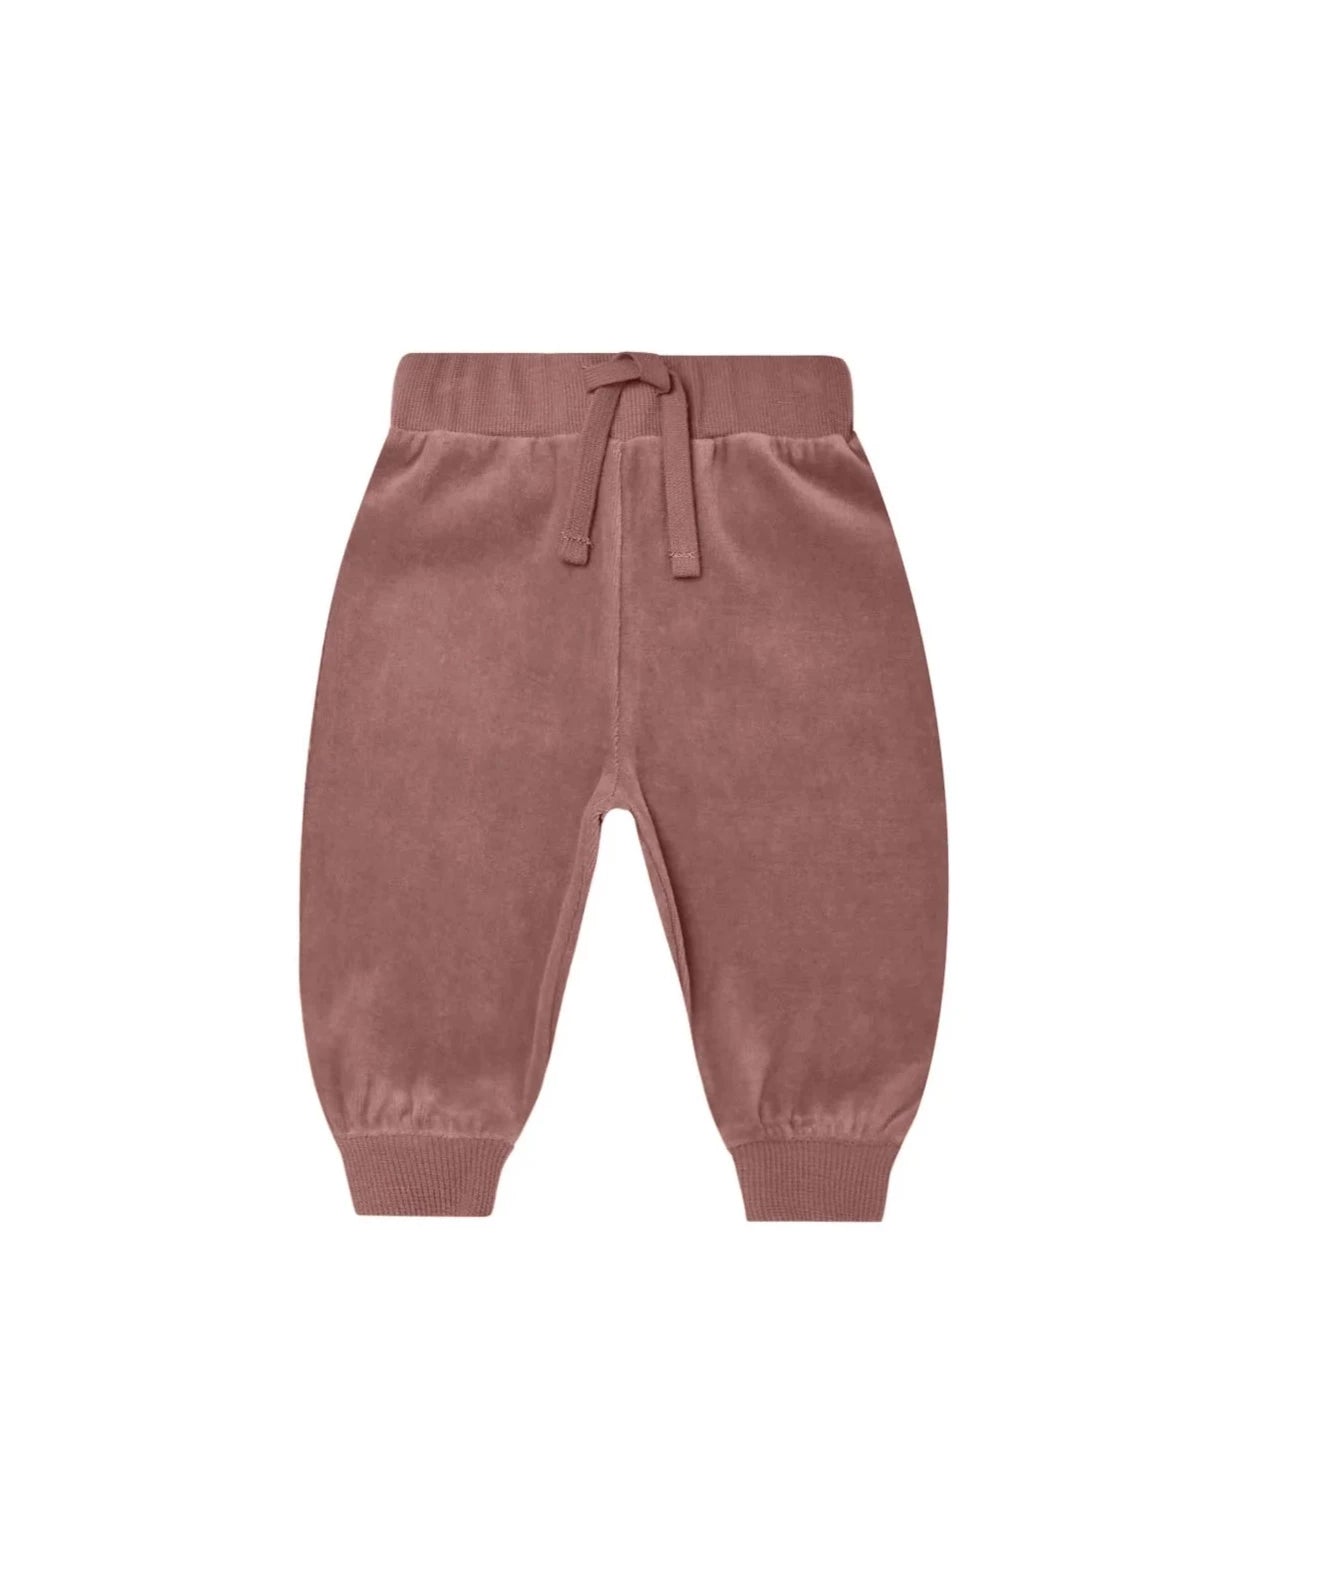 velour fig color sweatpants with tie at waist